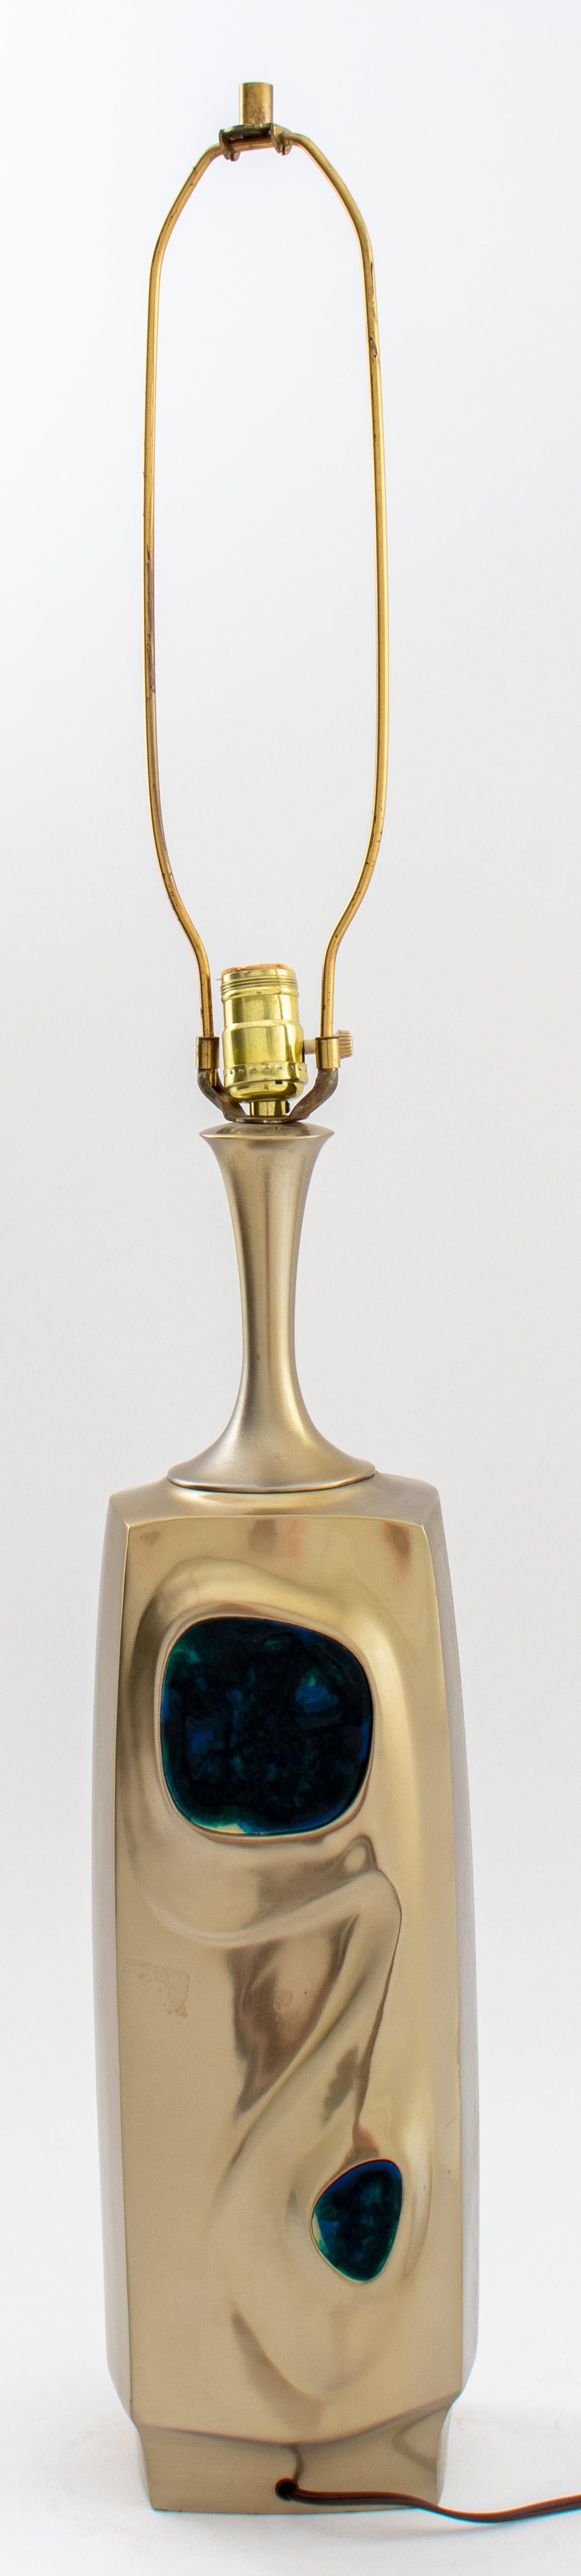 Mid 1960s style gold tone lamp, rectangular amorphic form, with areas of inlaid polychrome resin. Measures: 39